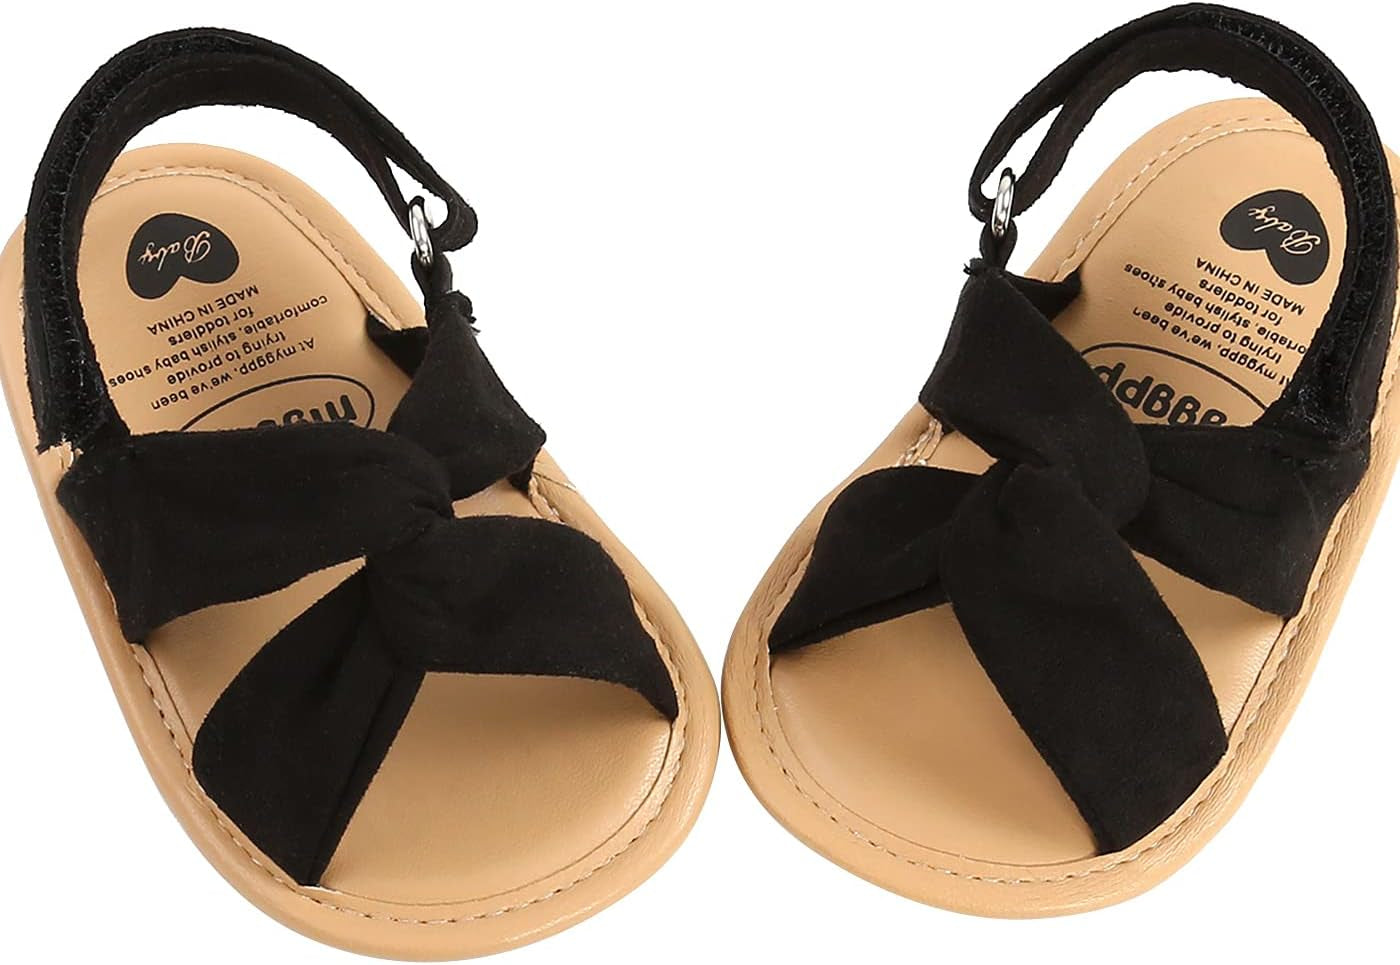 Prewalker Infant Girls' Breathable Summer Sandals in a Basic Style with a Solid Color and Soft Sole